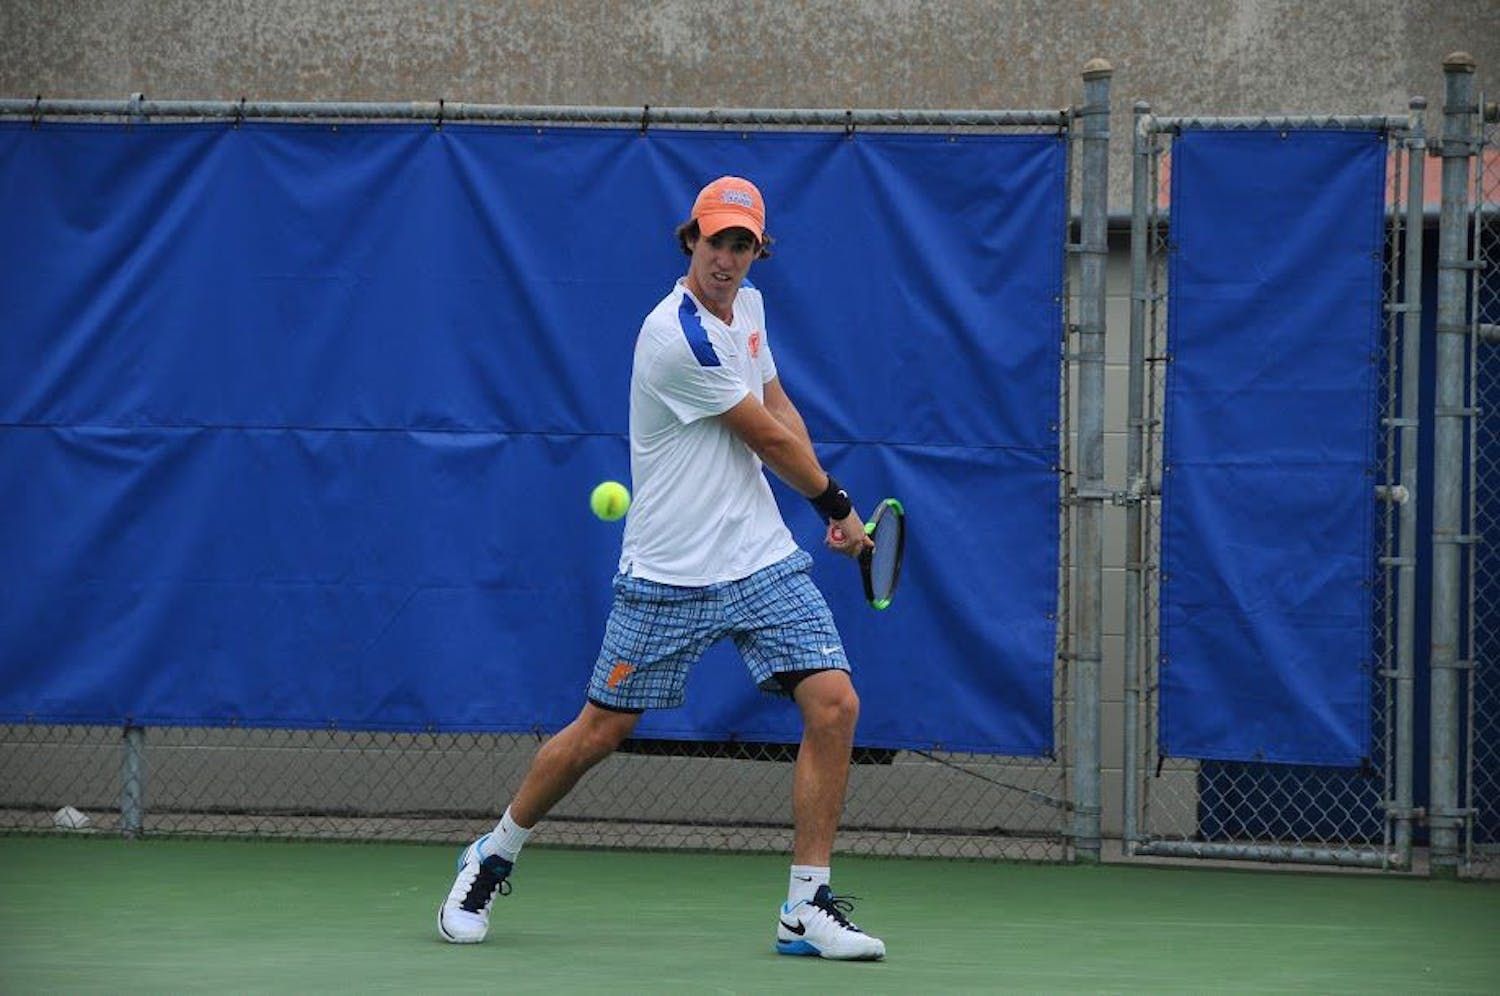 UF's Alfredo Perez advanced in singles play at the National Fall Championships in Indian Wells, California, with a win over Nicolas Moreno de Alboran of UC Santa Barbara on Wednesday afternoon.&nbsp;